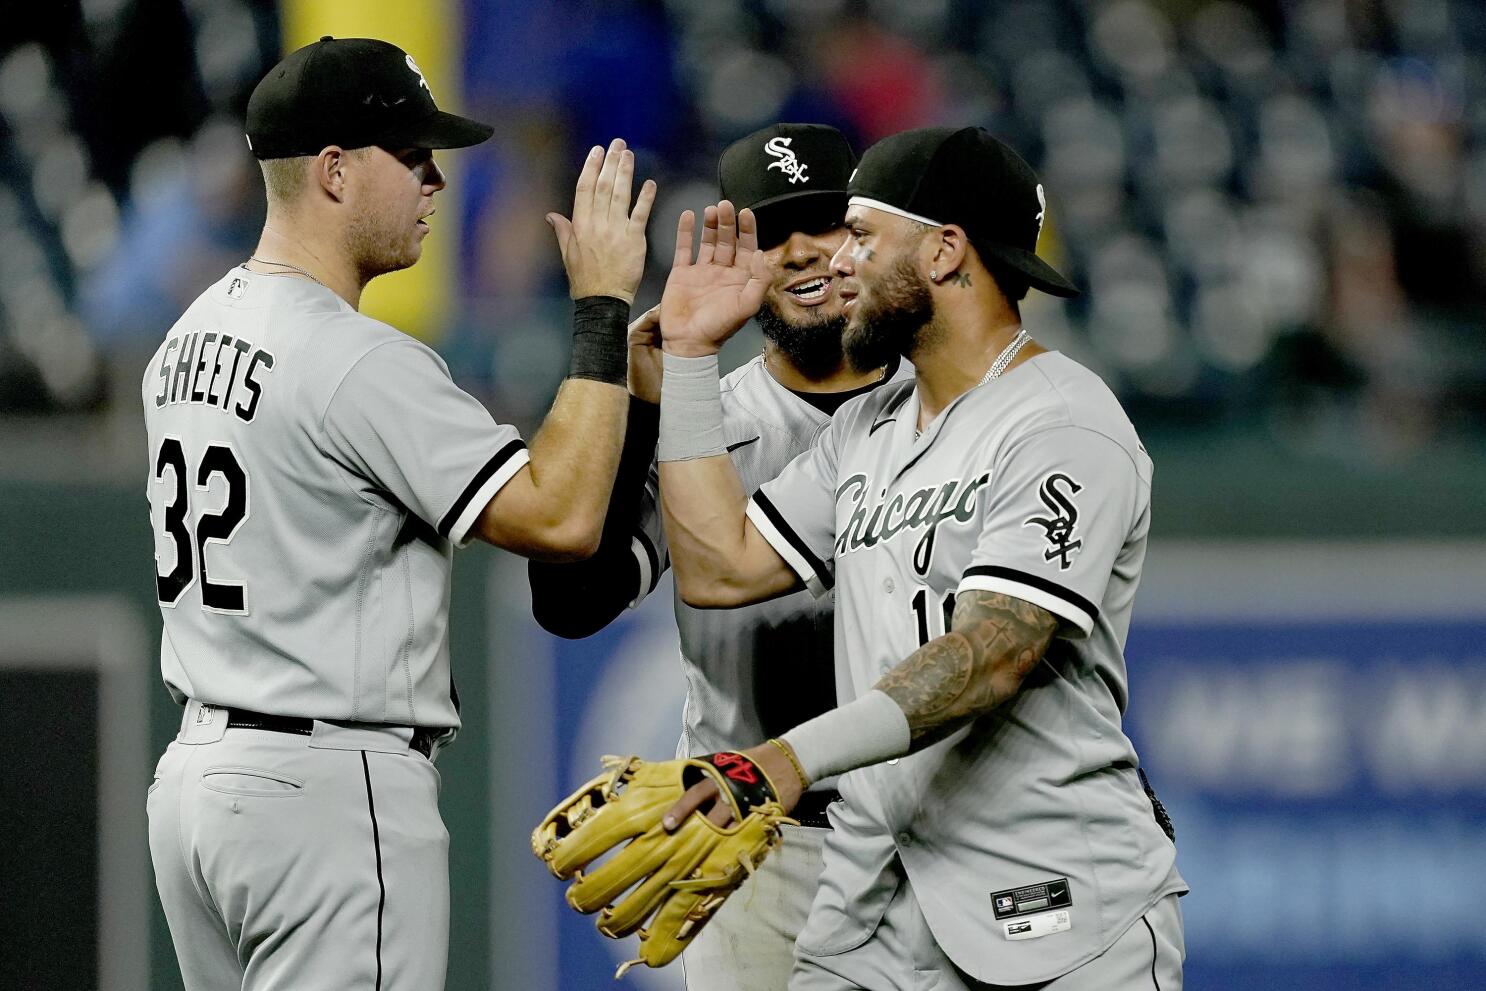 Minus All-Star SS Anderson, White Sox split twinbill with KC